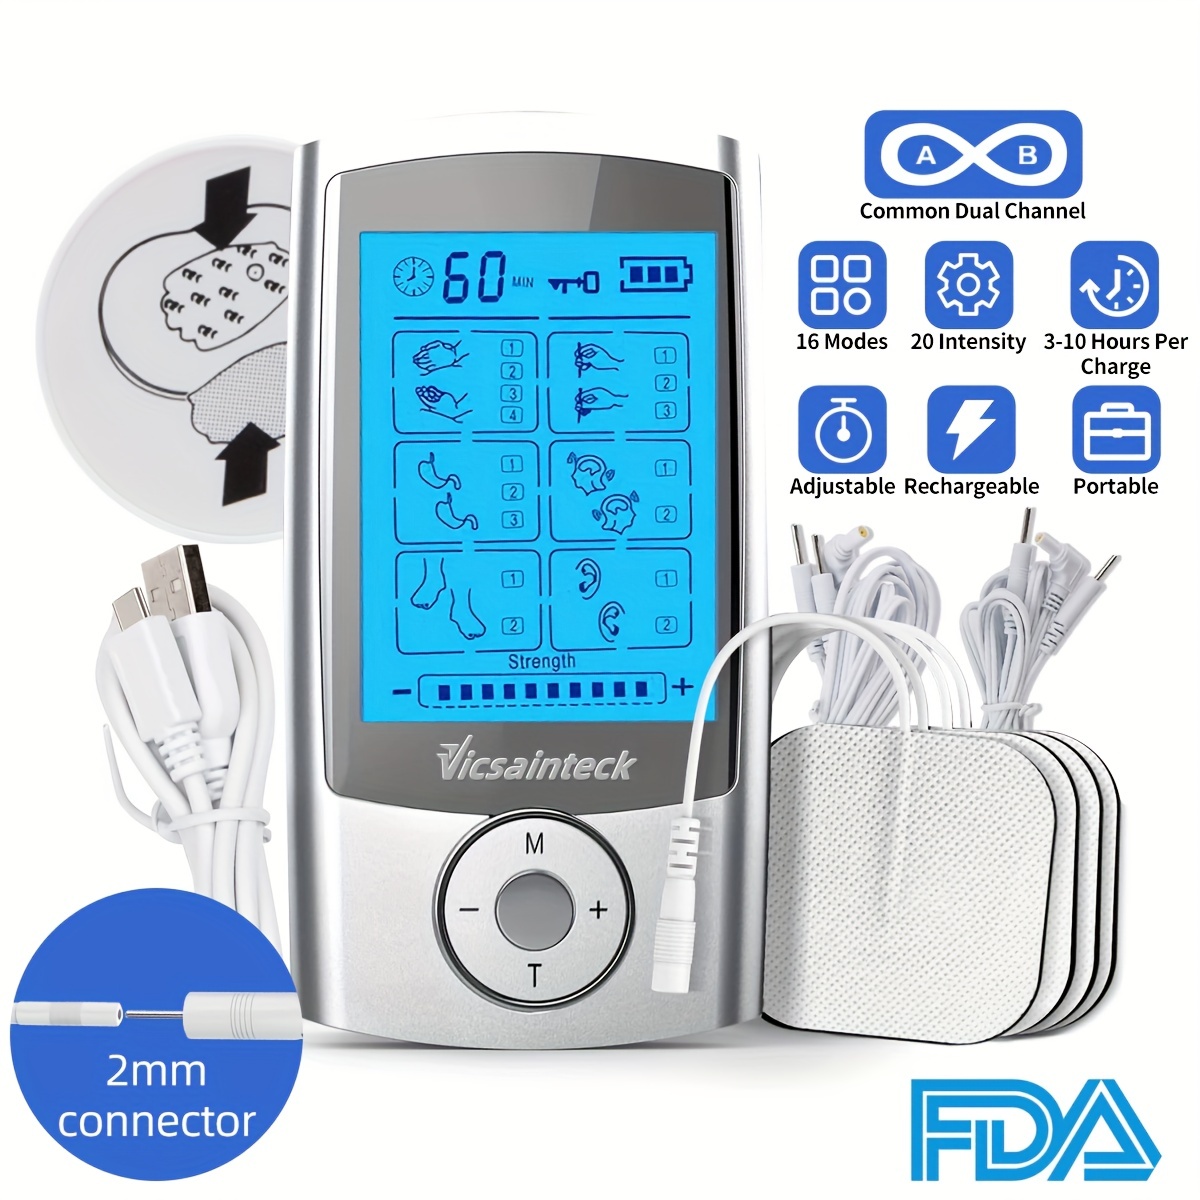 TENS Unit Electronic Pulse Massager for Electrotherapy Pain